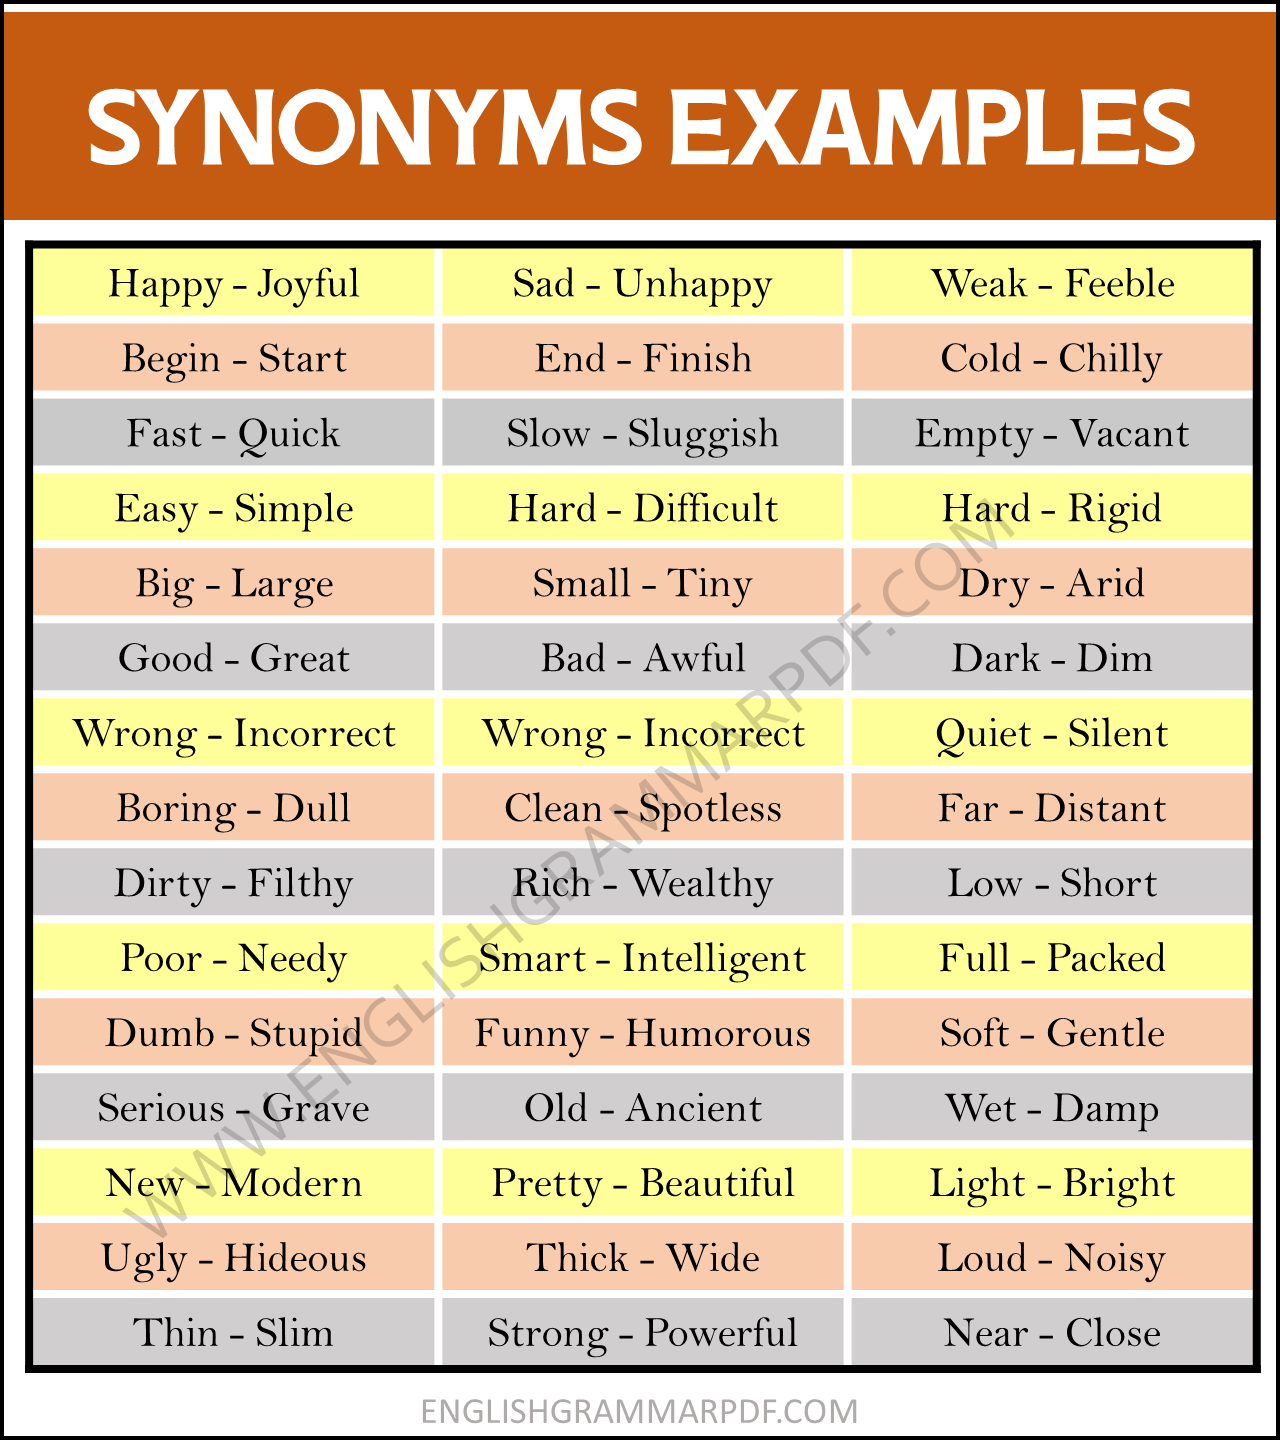 Synonyms Examples